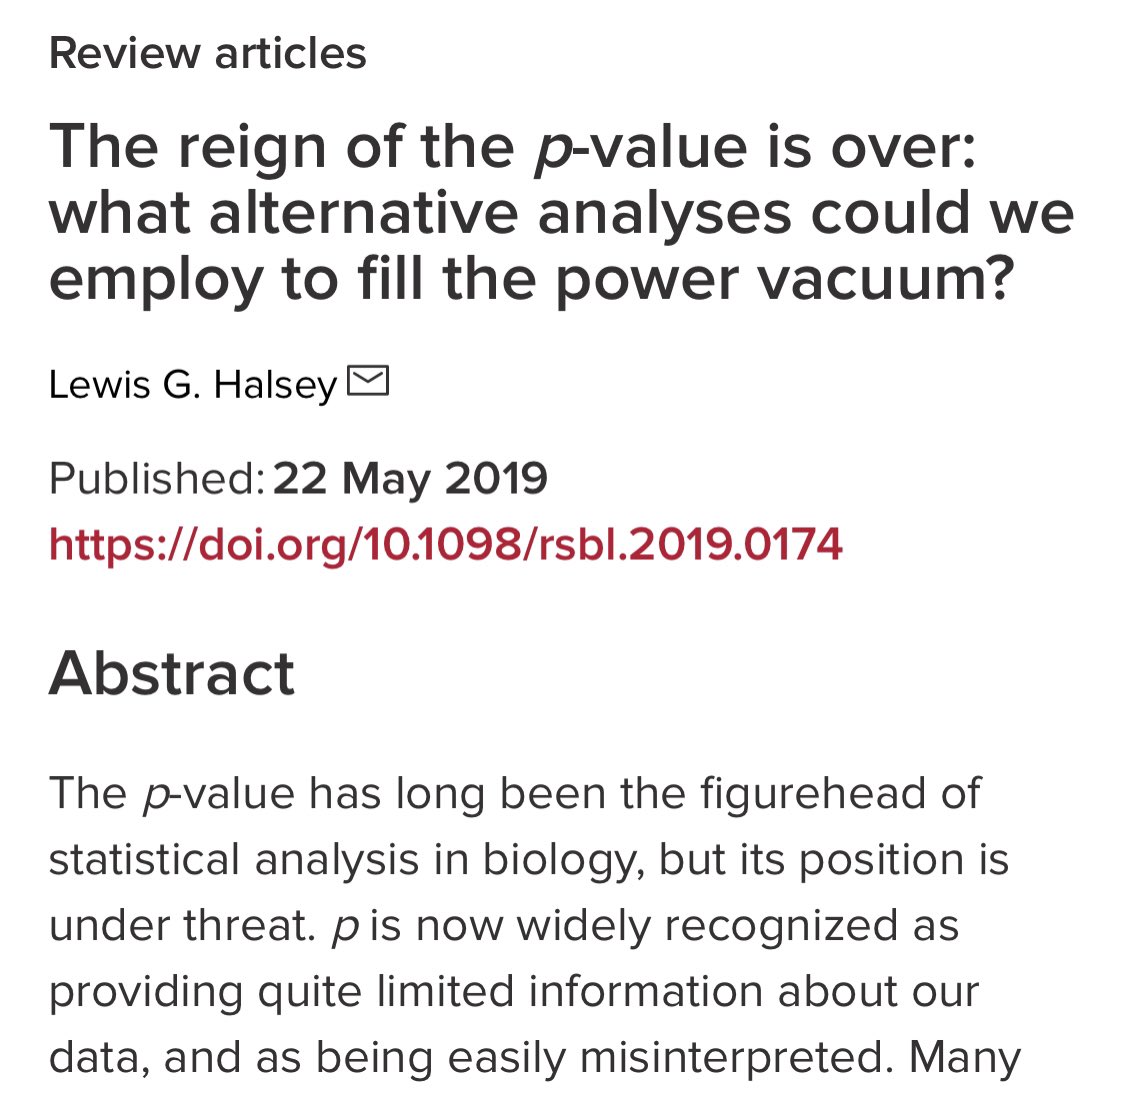 Leading scientists have raised concerns about the autocratic tendencies during the “reign” of the p-value, including misinformation being spread by the p-value on social media. https://royalsocietypublishing.org/doi/10.1098/rsbl.2019.0174